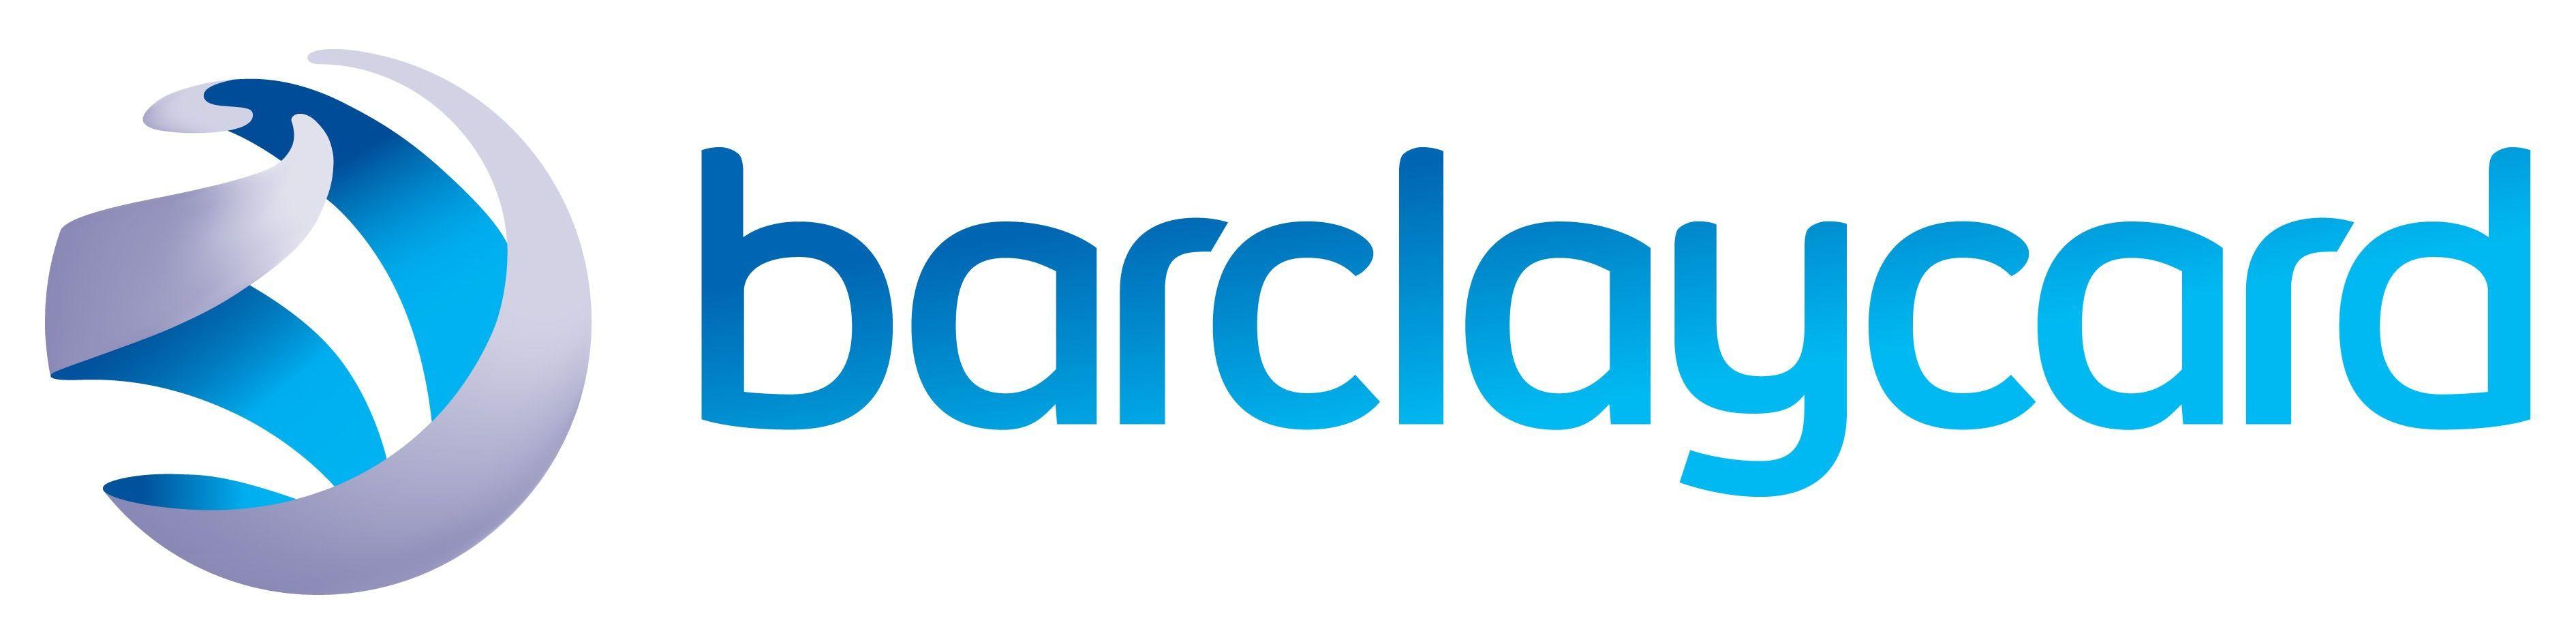 Barclaycard Logo - BarclayCard Confirmed for eCommerce Show North